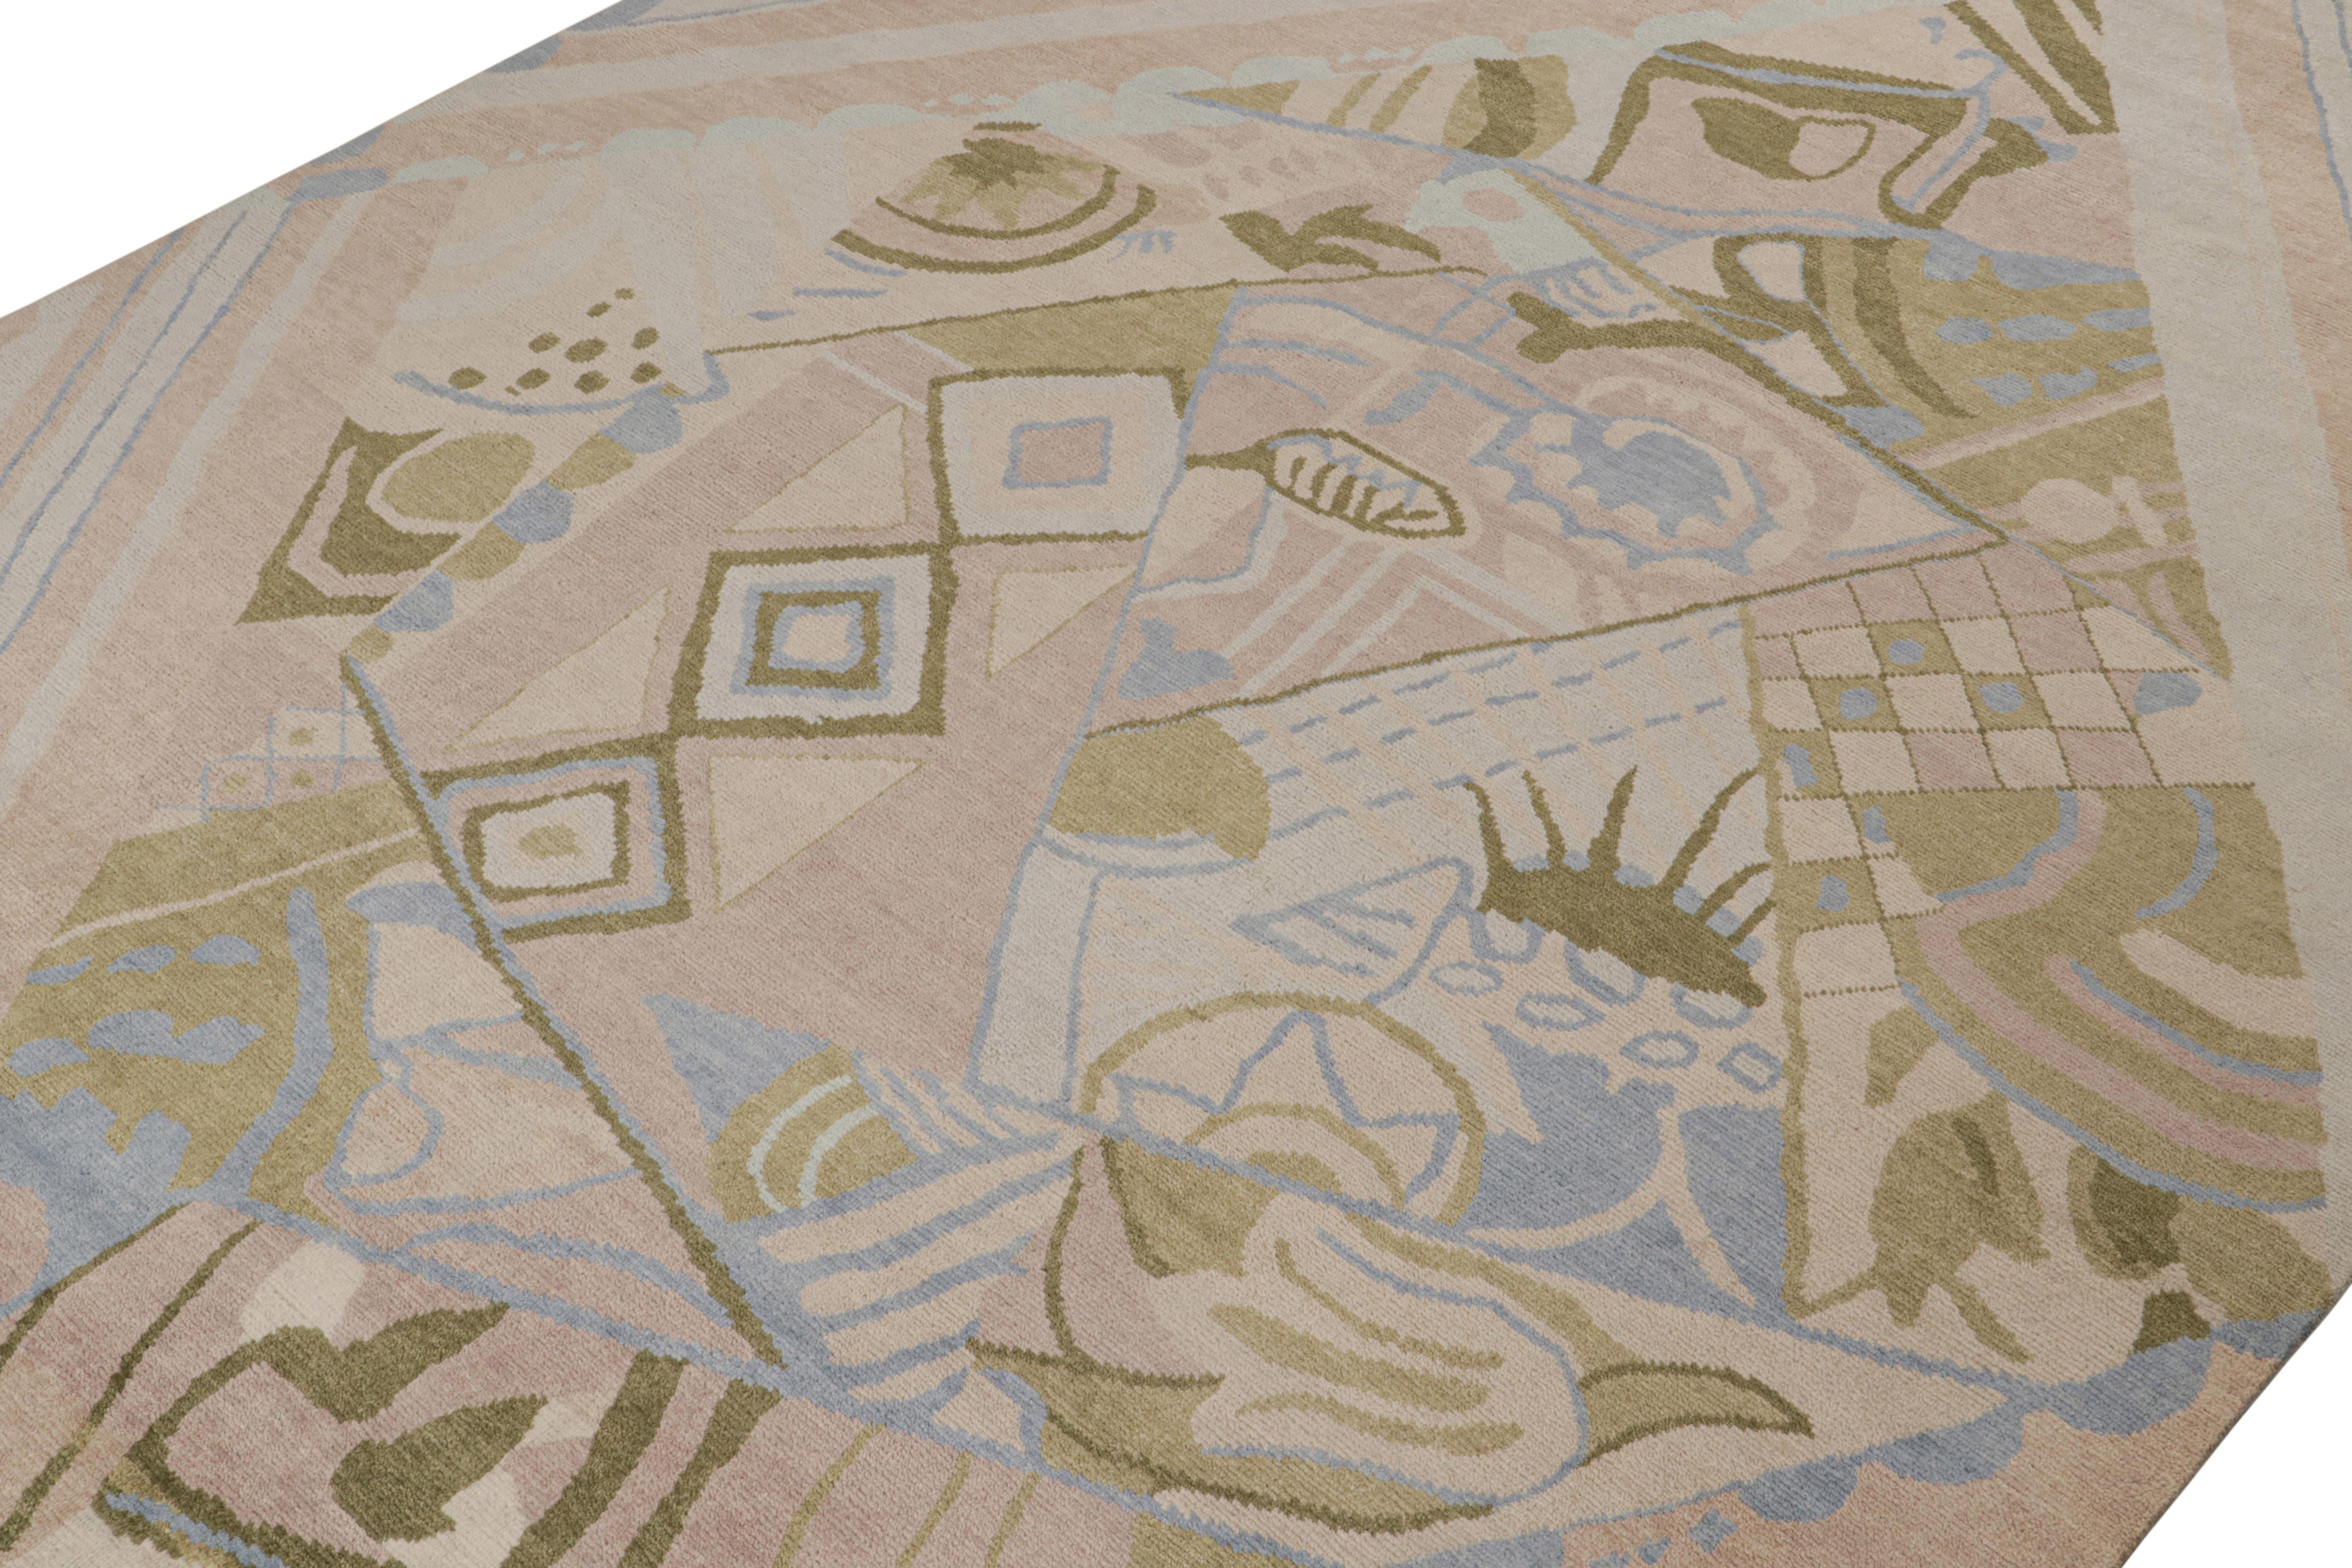 This 10x15 ode to French Art Deco rugs is the next addition to Rug & Kilim’s newly inspired Deco Collection. hand knotted in wool.

Further on the Design: 

This piece boasts the Deco style of the 1920s and reimagines it with new possibilities in